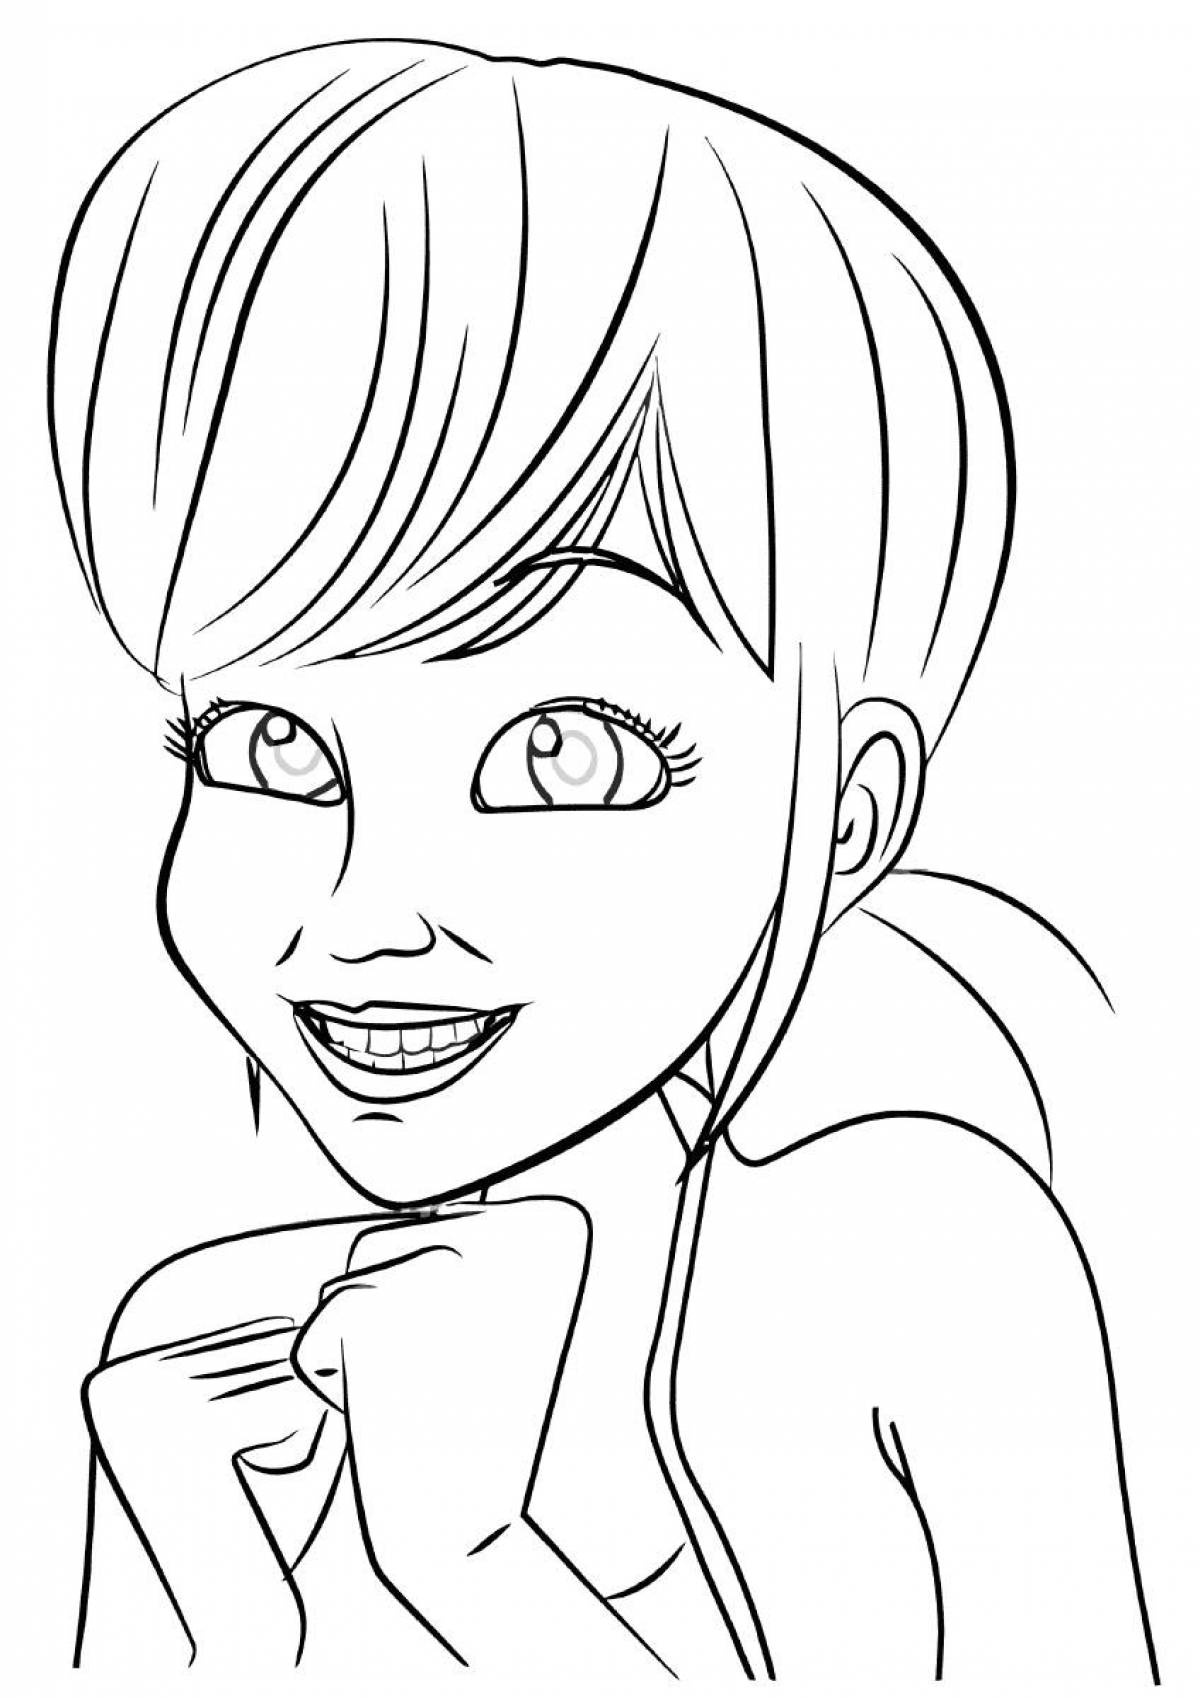 Animated marinette coloring book